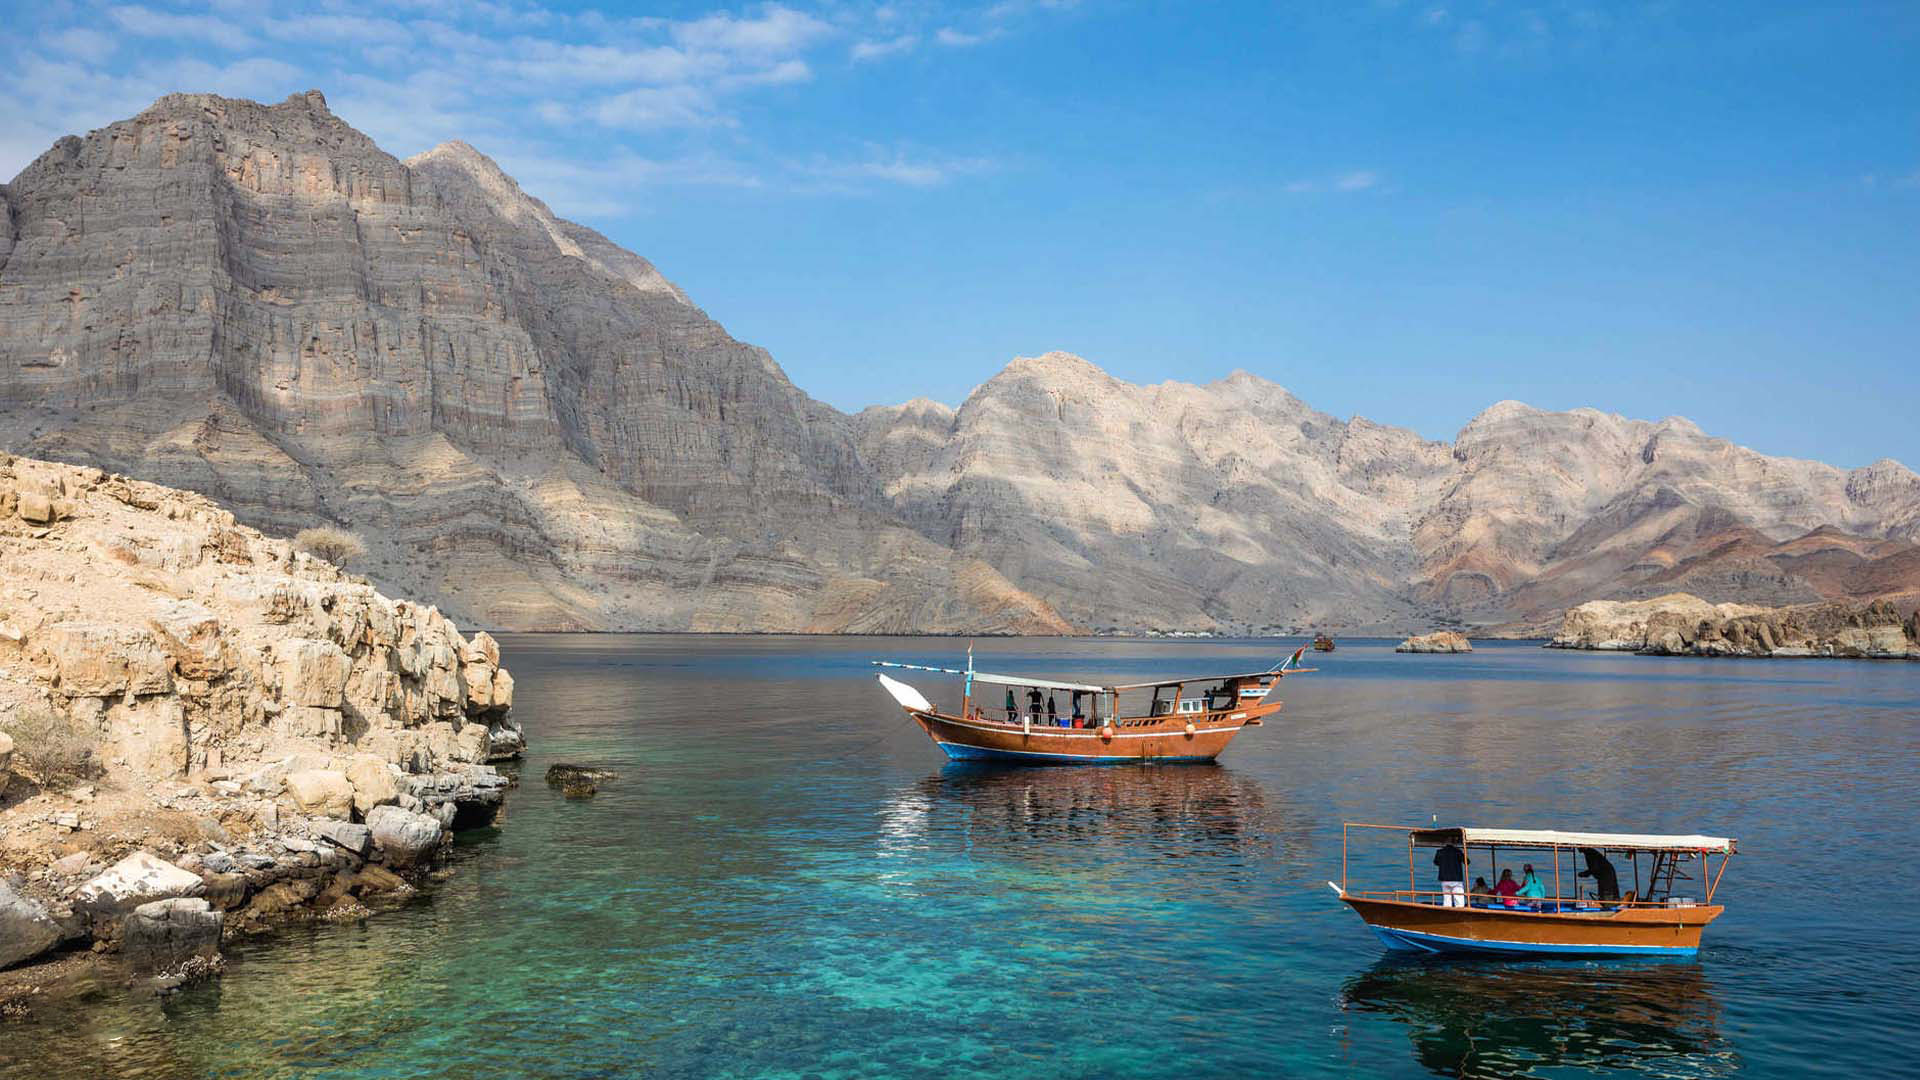 In a panoramic photograph, a sailing boat is immortalized gracefully navigating the waters of the Musandam Peninsula, with the majestic mountains providing a breathtaking backdrop.